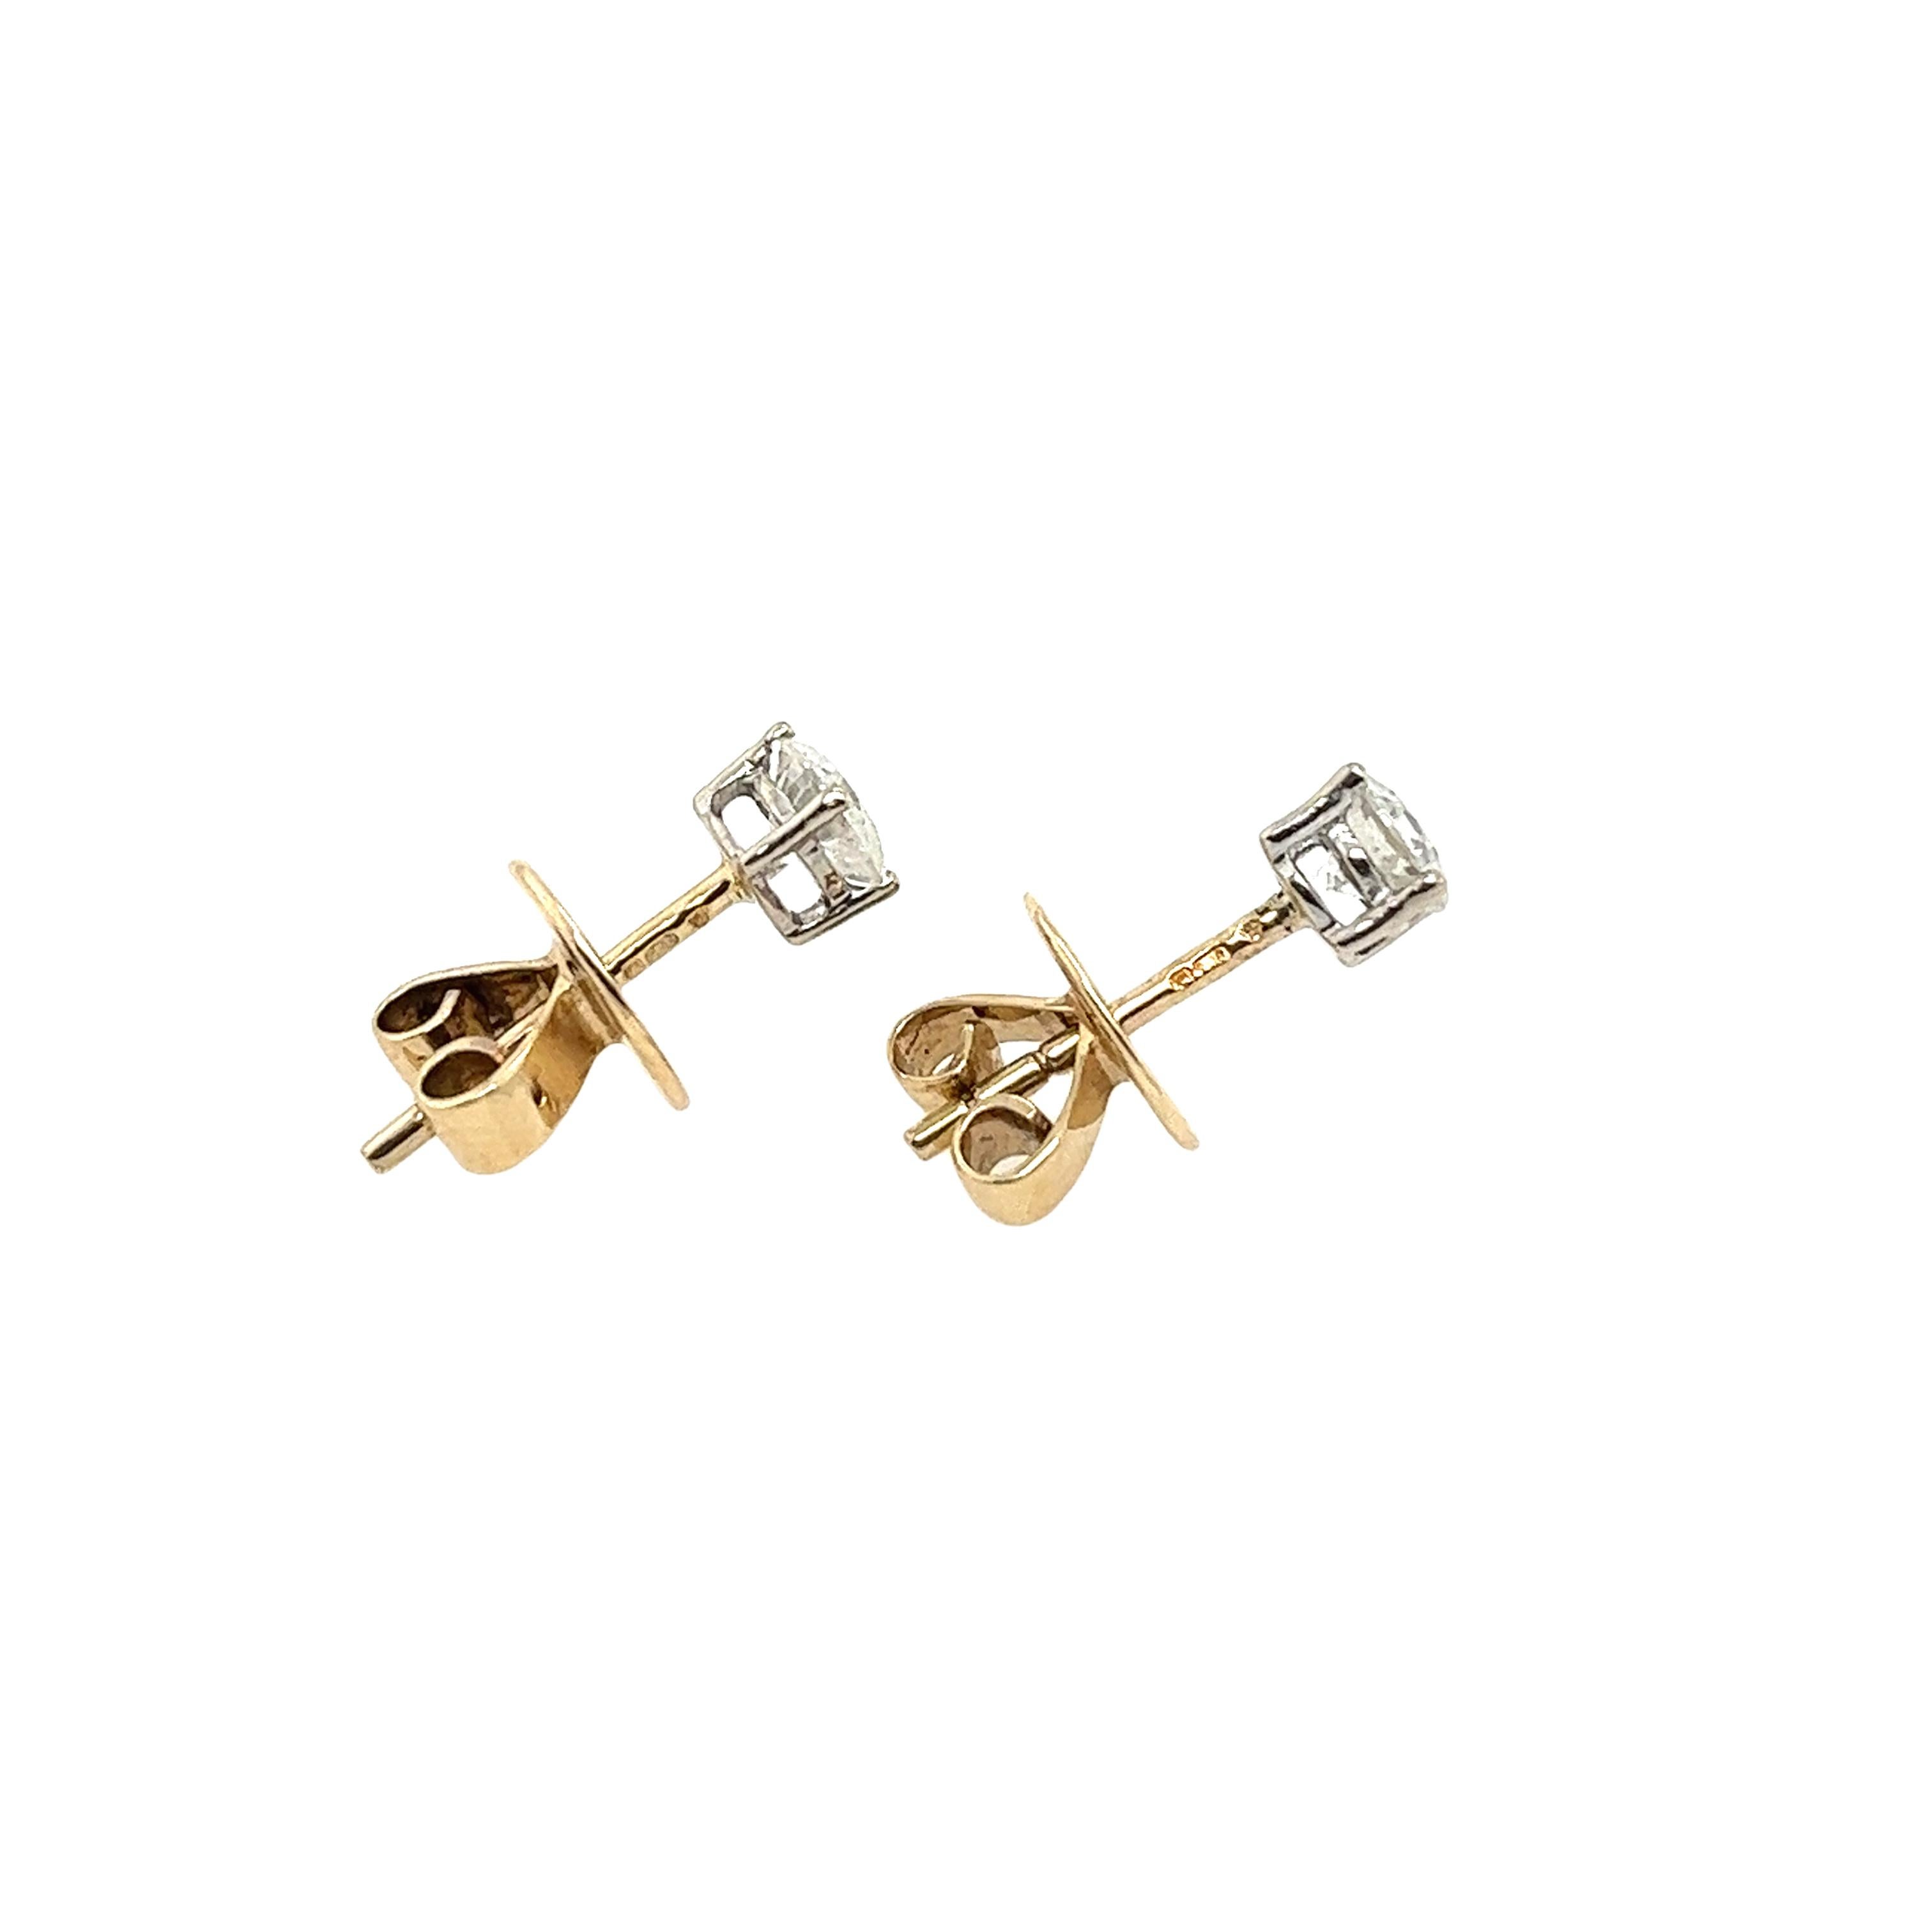 These stunning diamond earrings 
are the perfect pair to add to your collection. 
They are set in 9ct yellow & white gold. 
The pair is set with 2 round brilliant-cut diamonds, 
I-J colour SI3 clarity, with a total diamond weight of 0.65ct.
Total